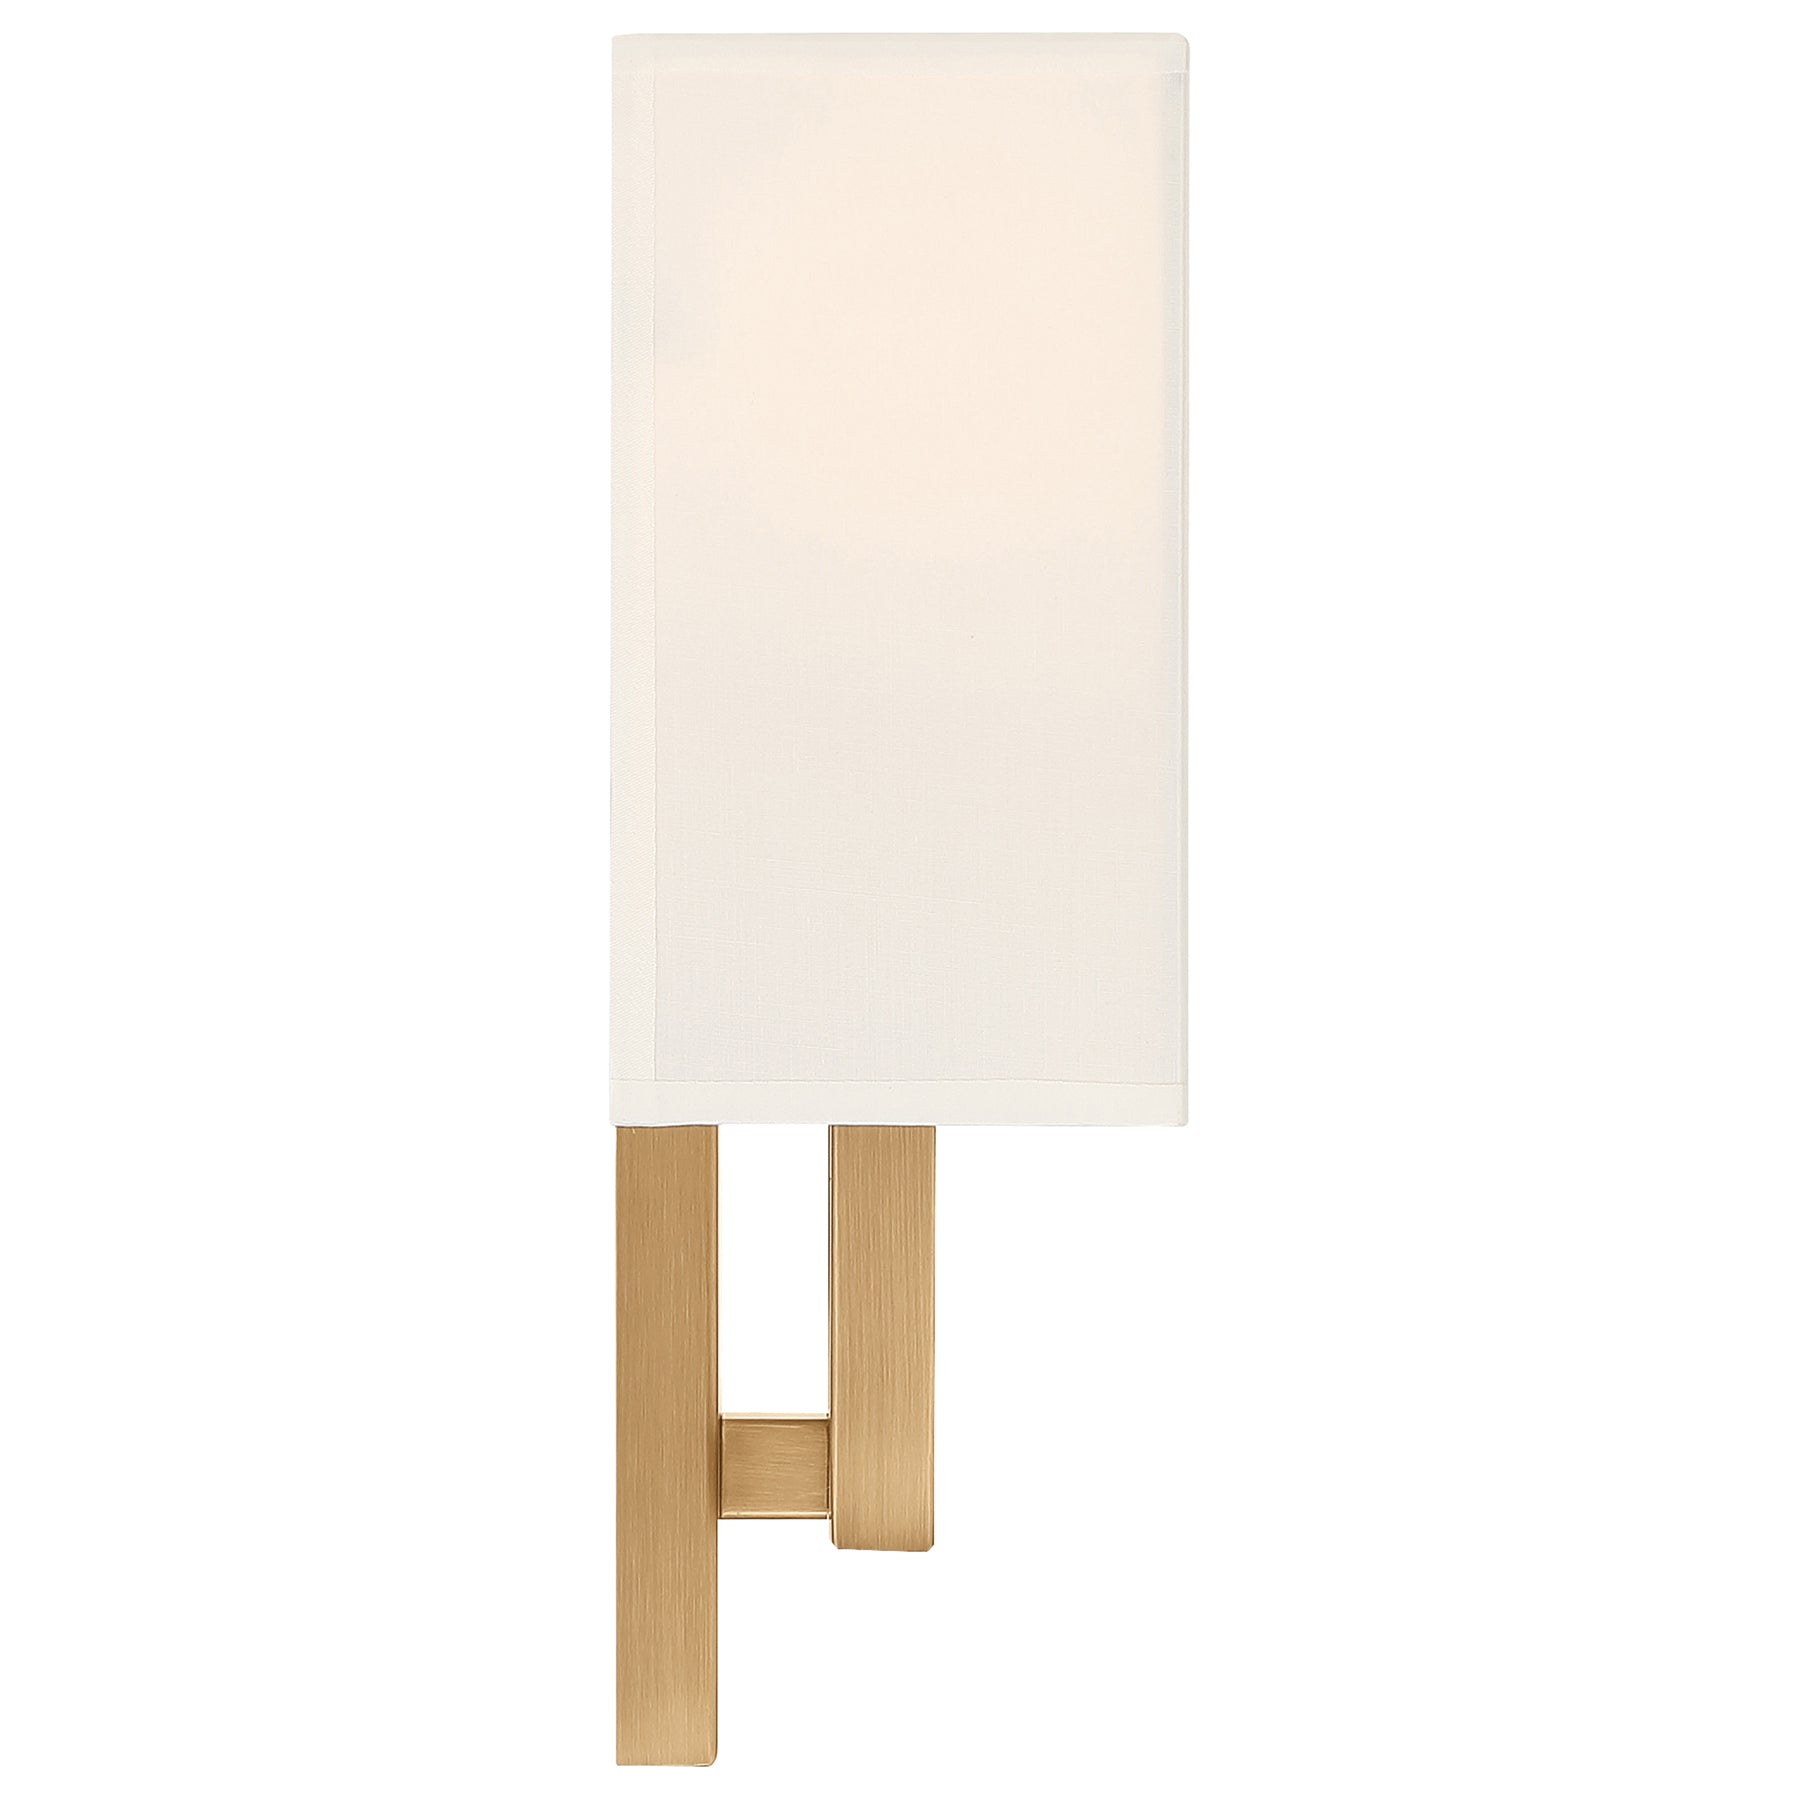  View details for Mid Town 15in. LED Lighting Wall Sconce (Antique Brushed Brass) Mid Town 15in. LED Lighting Wall Sconce (Antique Brushed Brass)